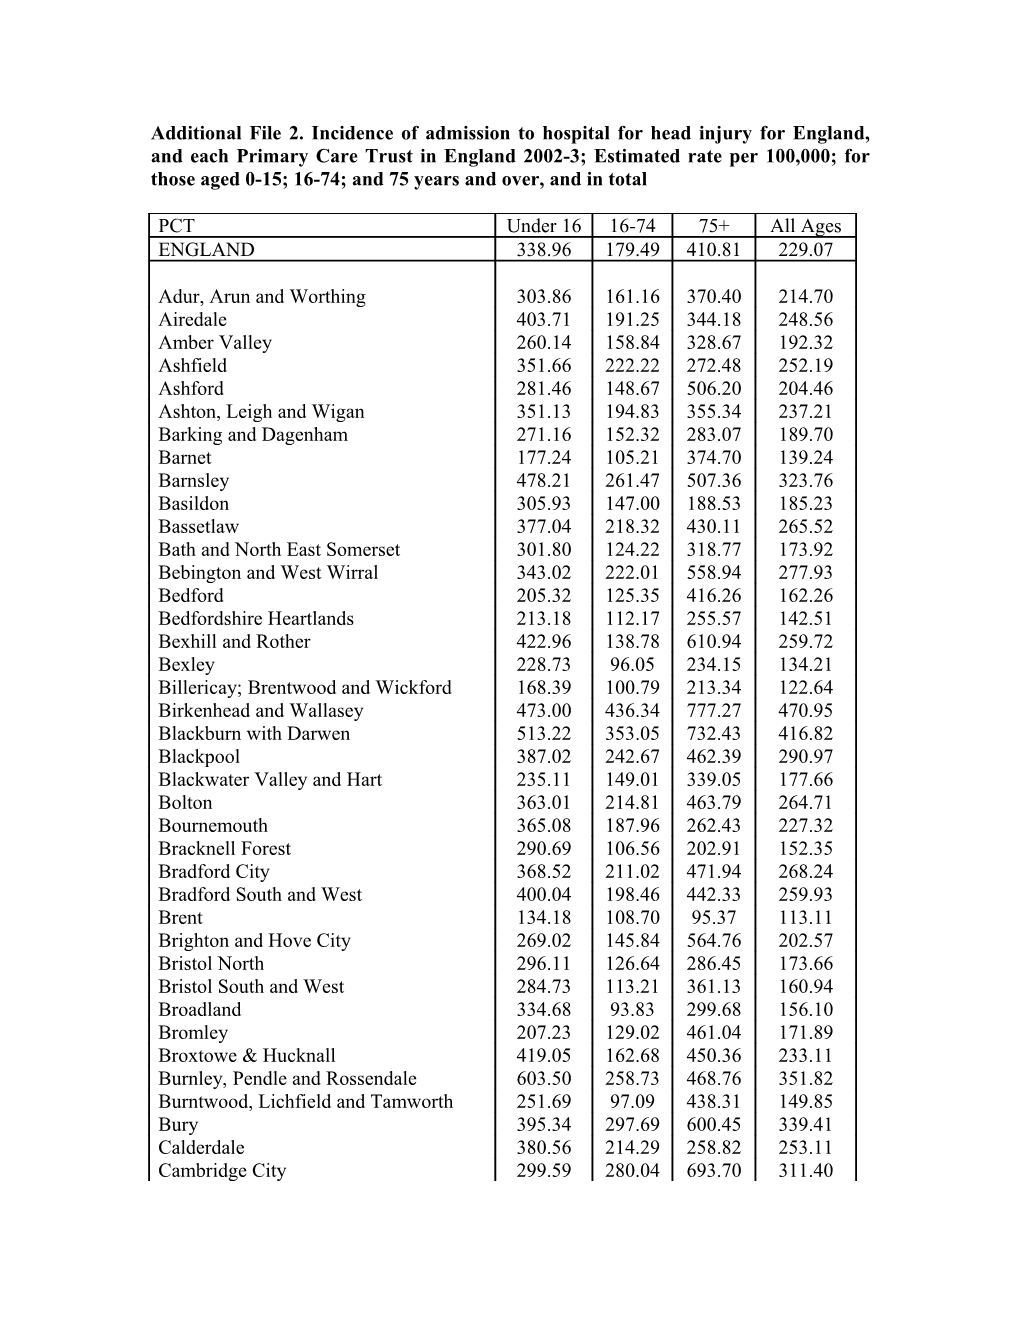 Additional File 2. Incidence of Admission to Hospital for Head Injury for England, And